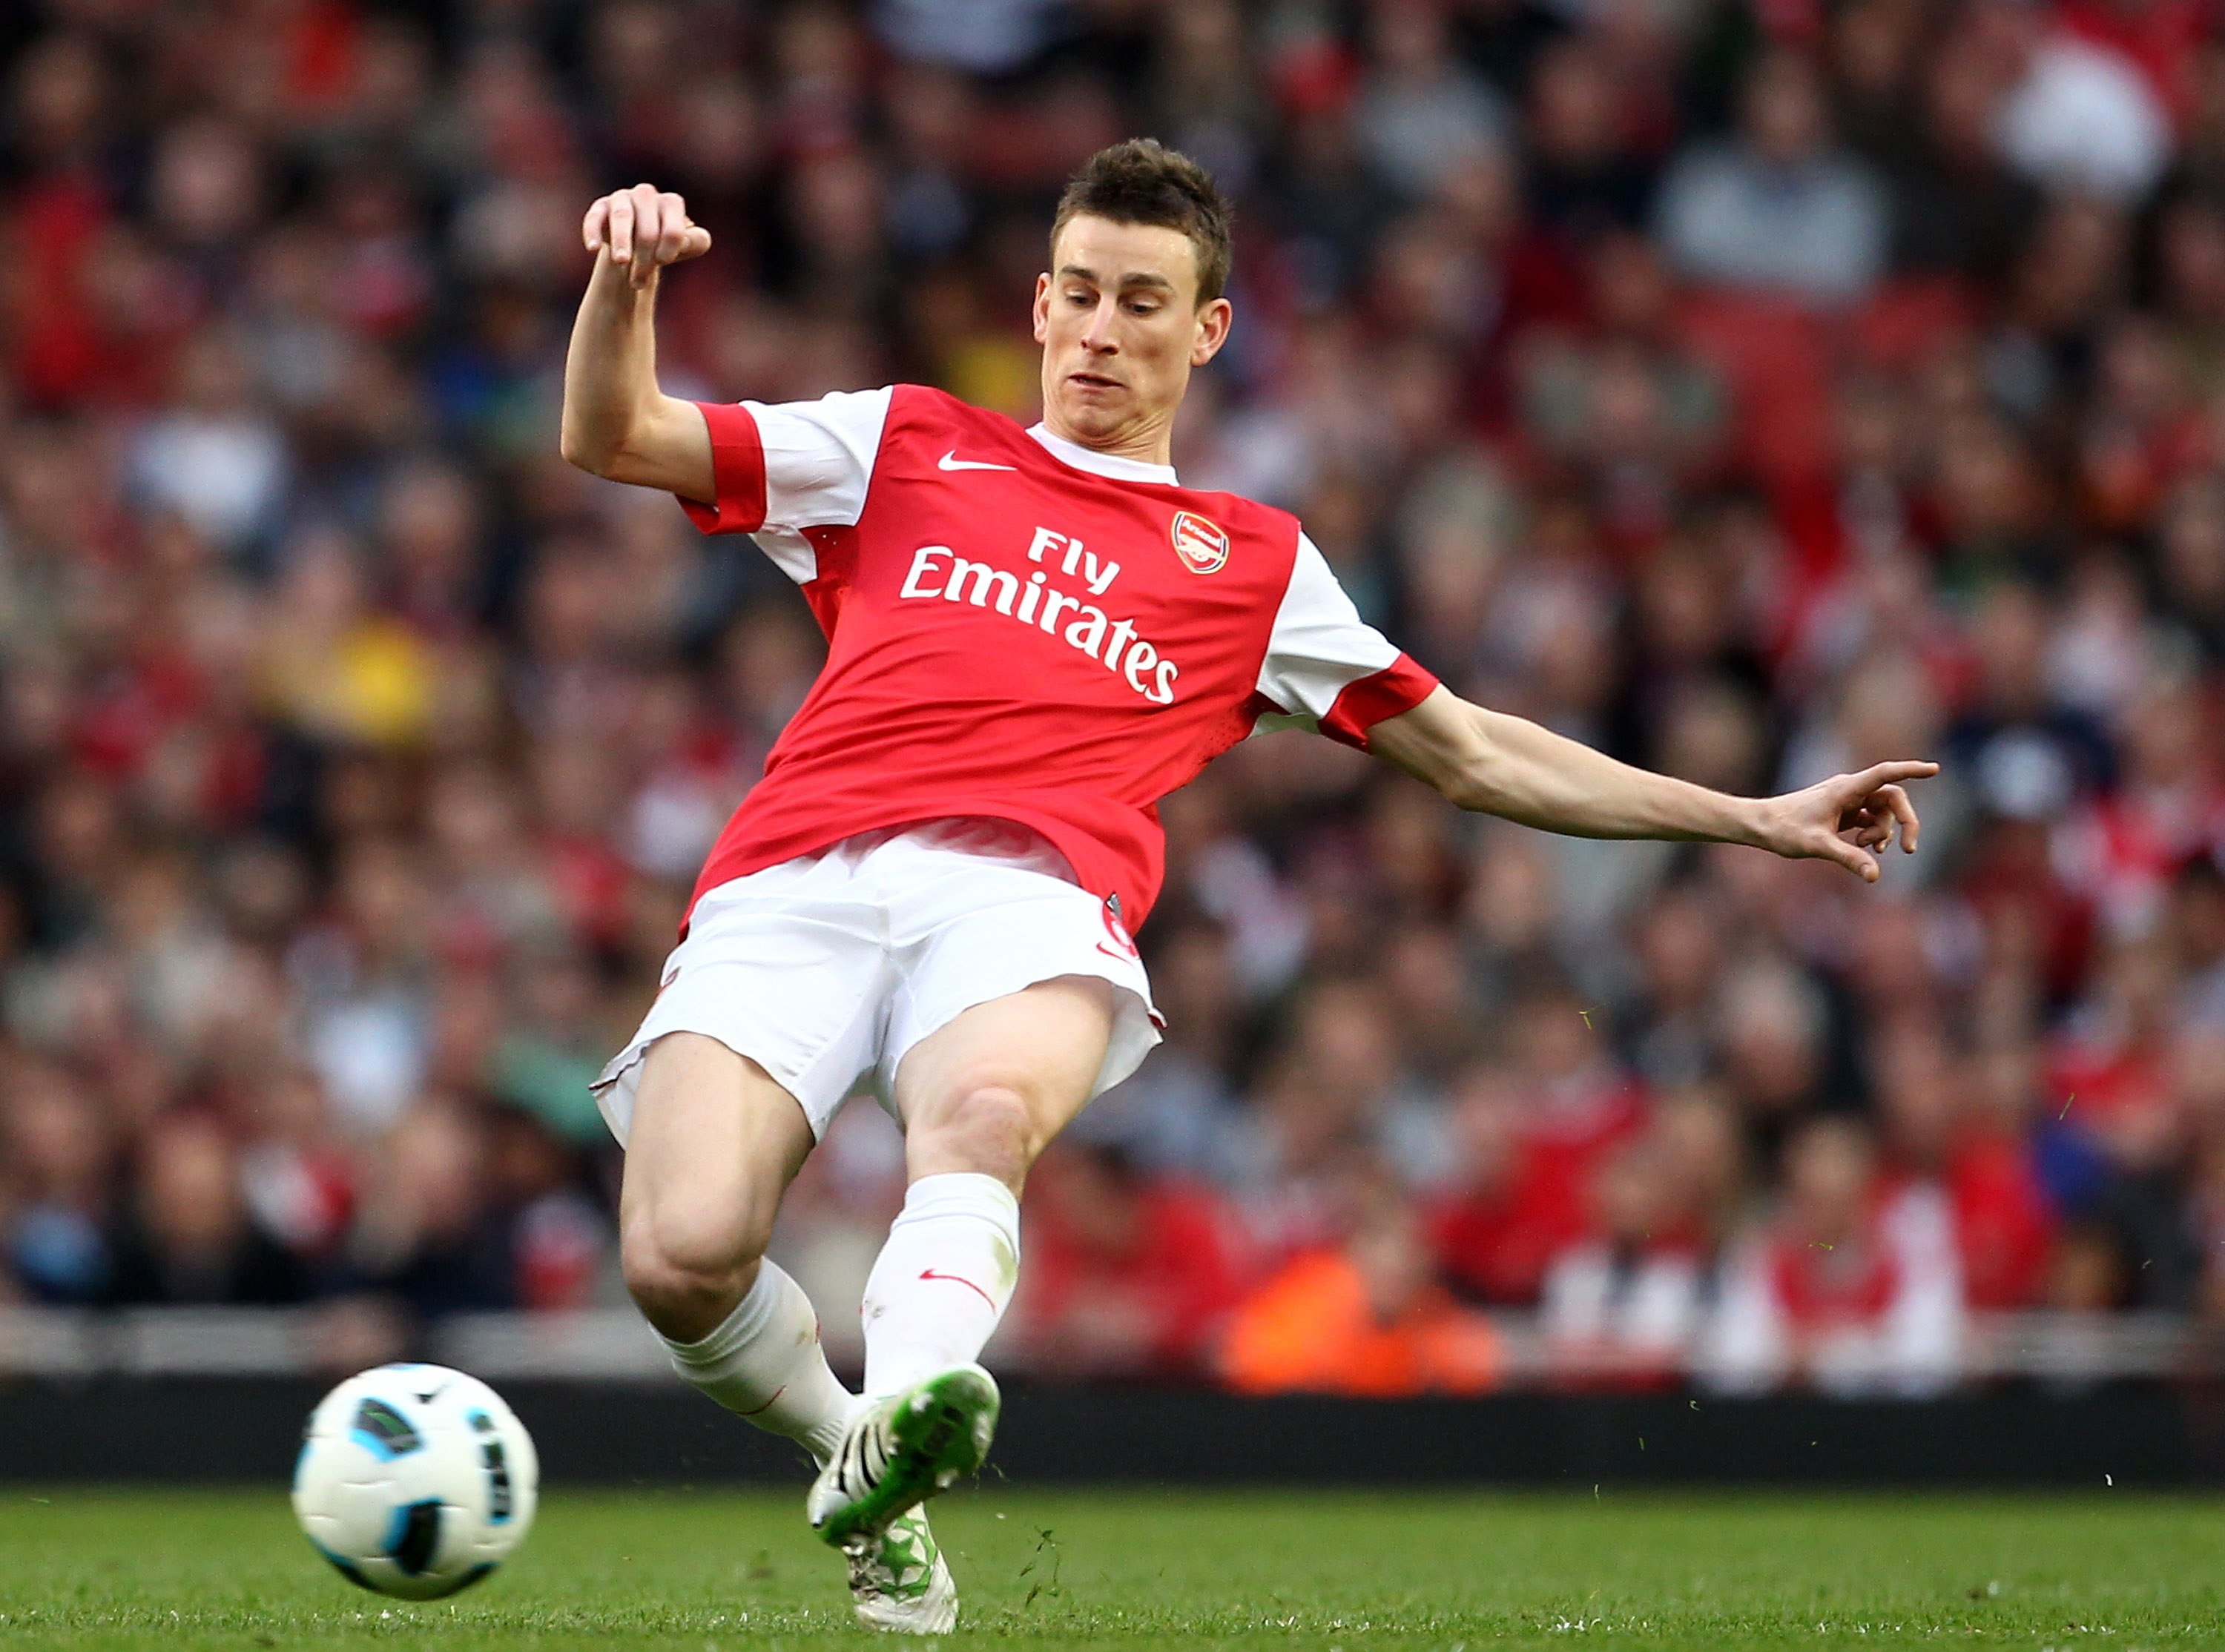 LONDON, ENGLAND - APRIL 02:  Laurent Koscielny of Arsenal on the ball during the Barclays Premier League match between Arsenal and Blackburn Rovers at the Emirates Stadium on April 2, 2011 in London, England.  (Photo by Julian Finney/Getty Images)